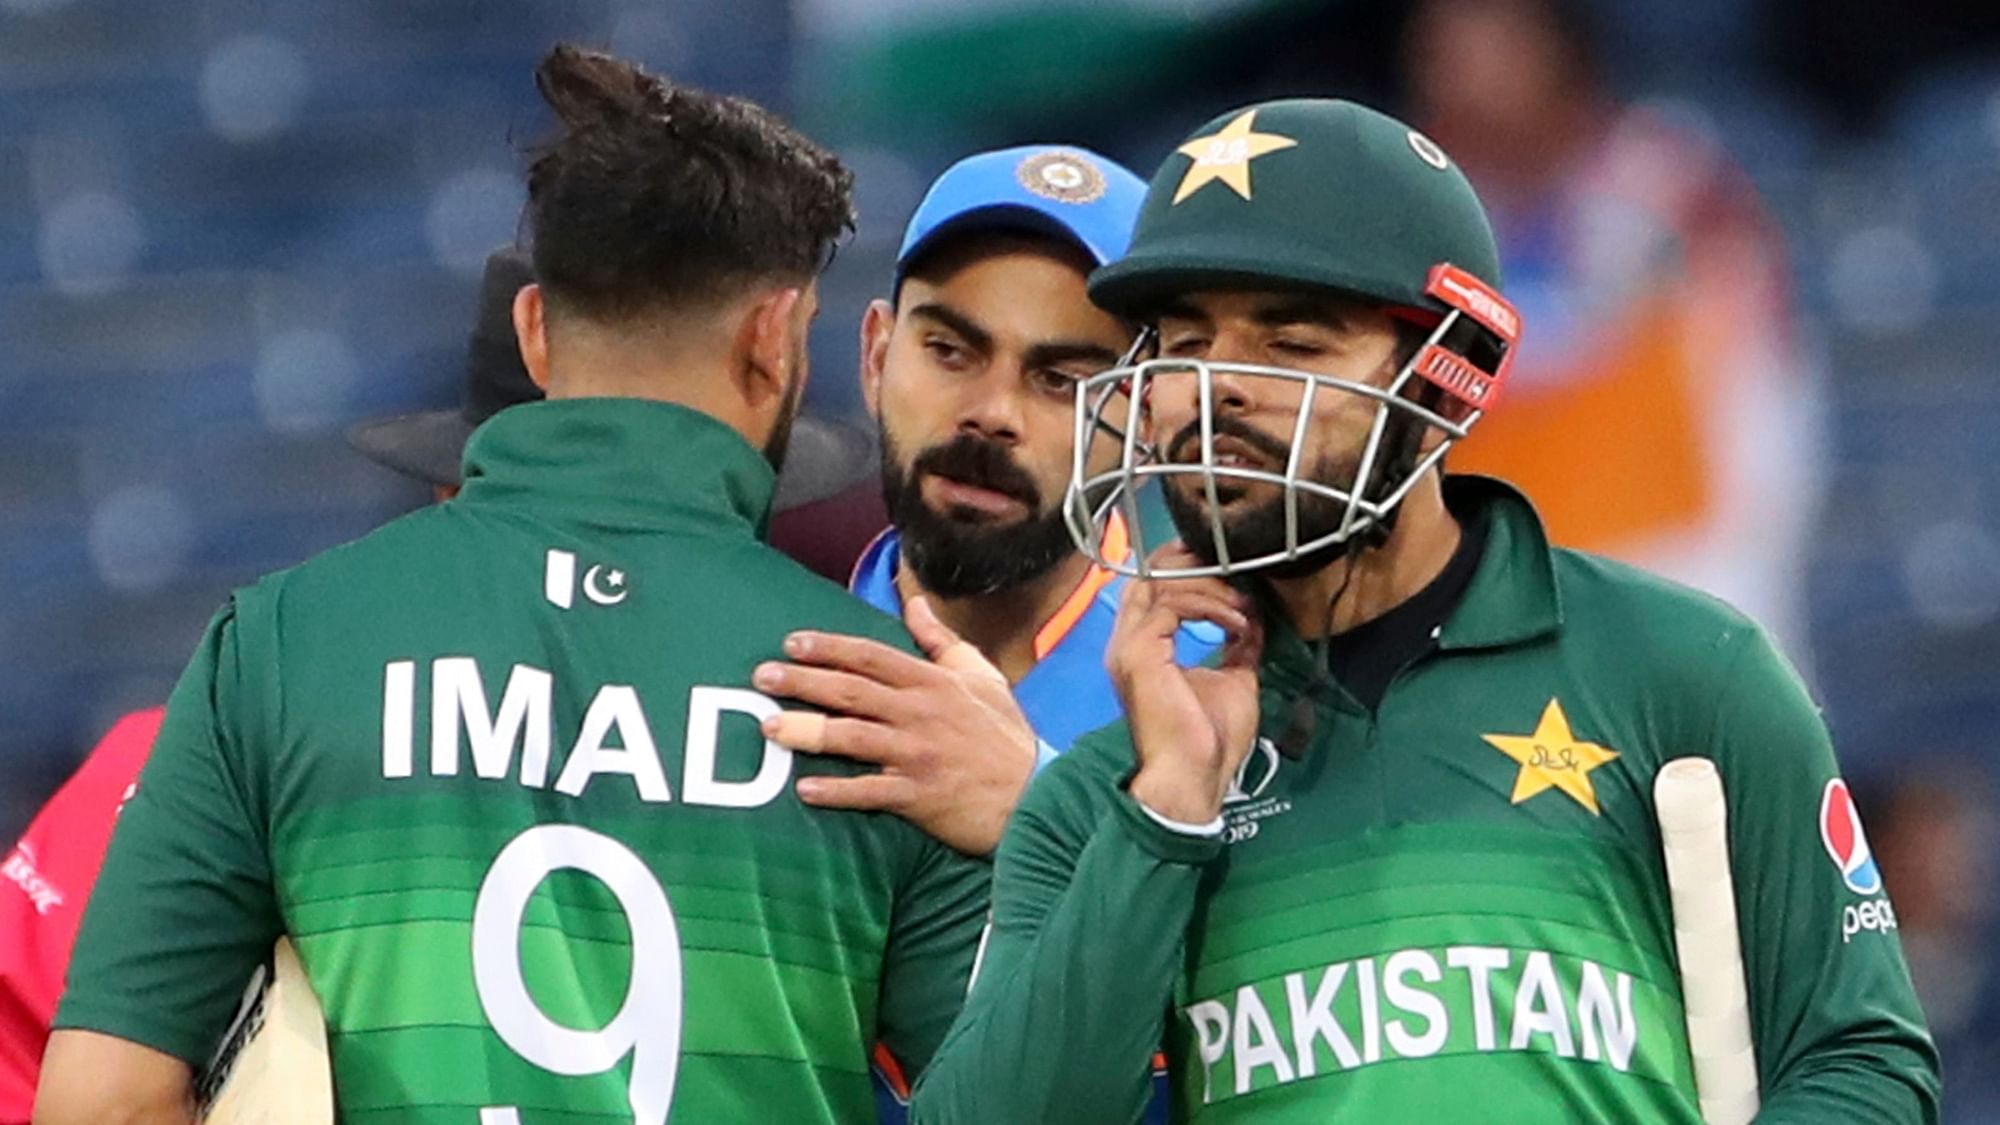 Delhi is likely to host two of Pakistan’s matches in the 2021 T20 World Cup to be held in India in October-November.